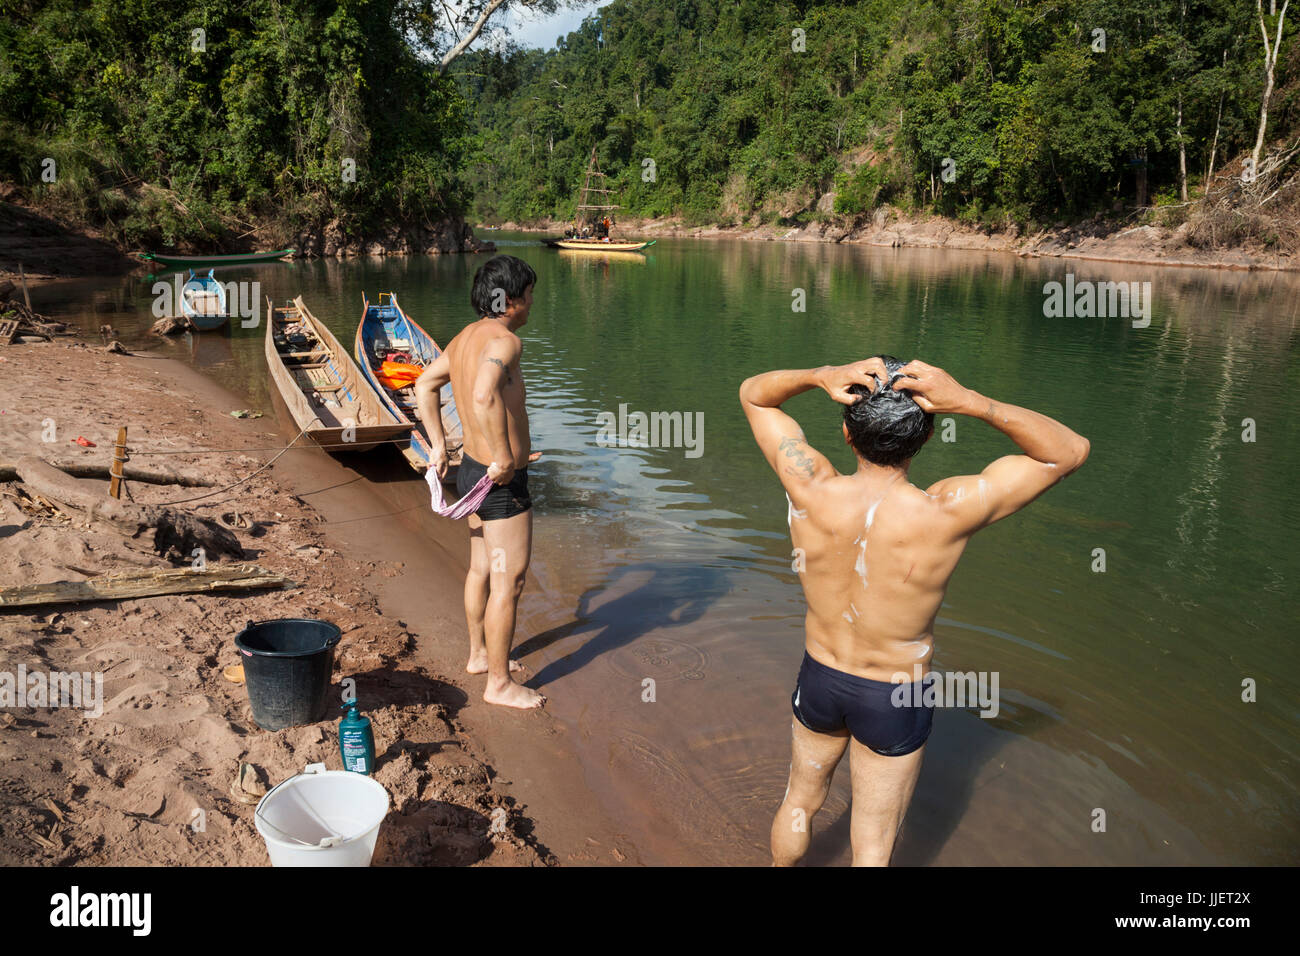 Chinese workers bathe as a drill rig collects core samples in a natural constriction of the Nam Ou River where Dam #7 is planned for construction, within Phou Den Din National Protected Area, Laos (despite Sino Hydro's charter not to impact country's national parks with their hydropower development). Stock Photo